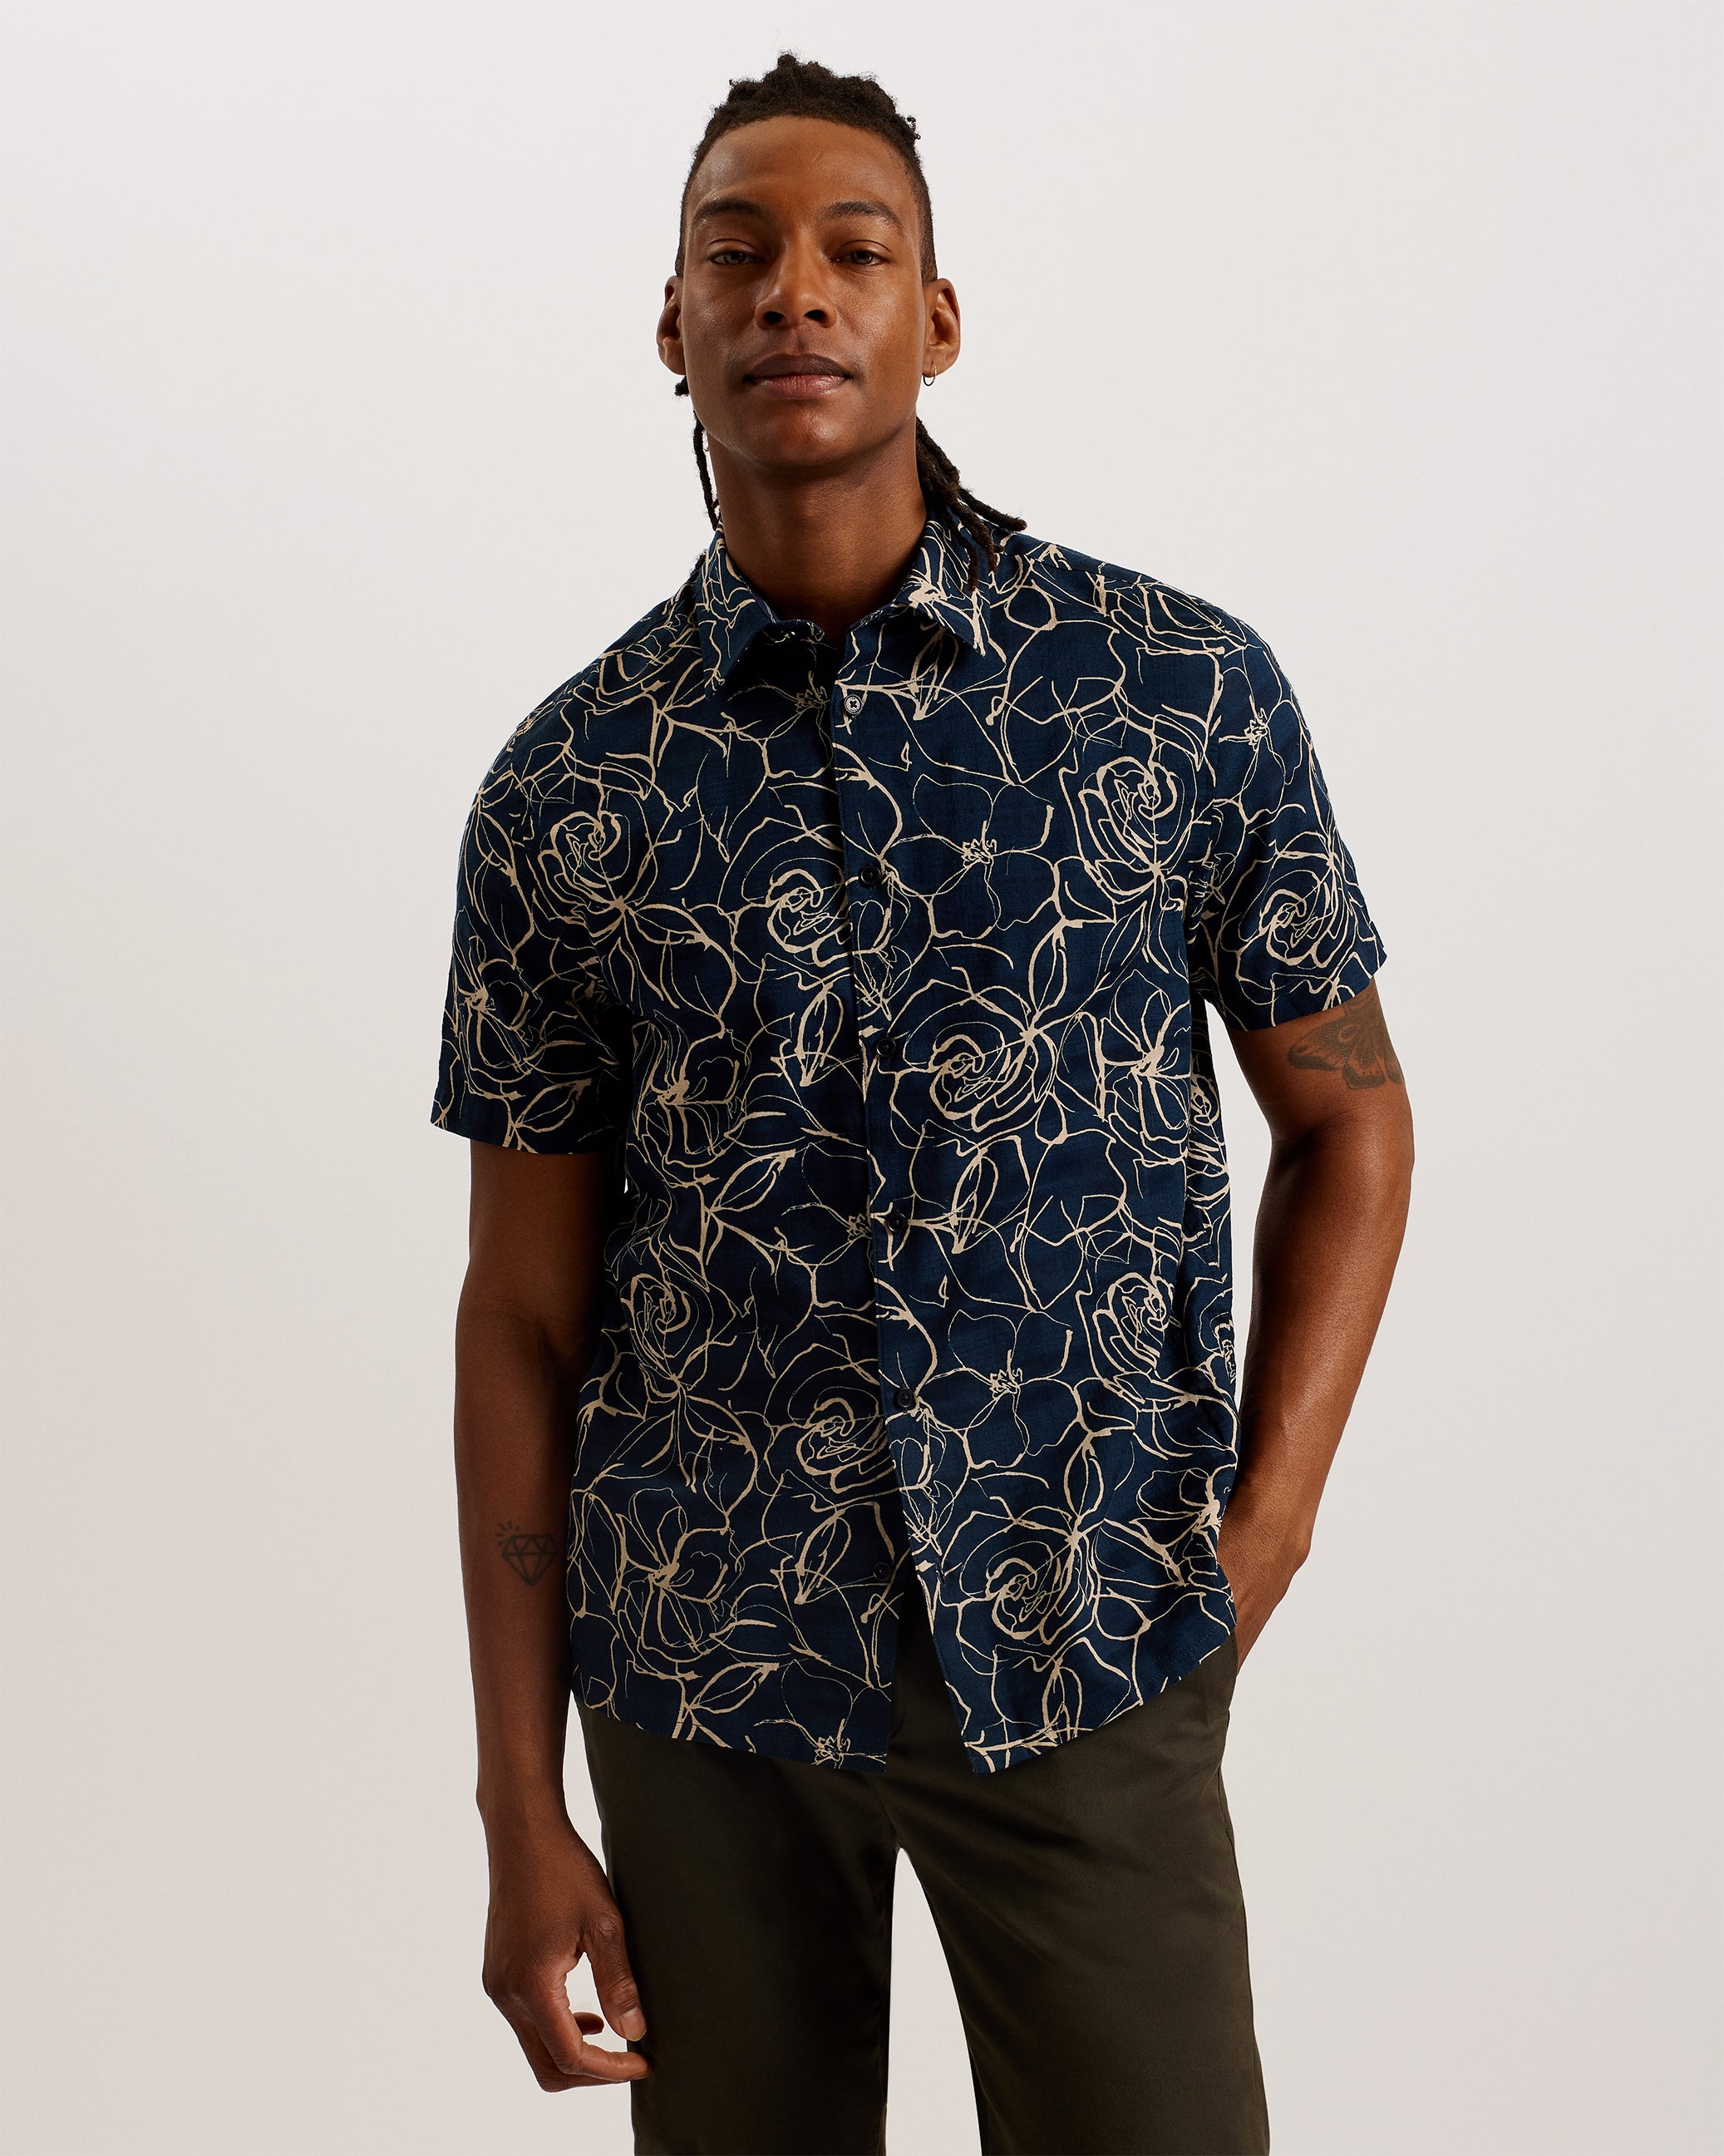 Men's New Shirts – Ted Baker, Canada